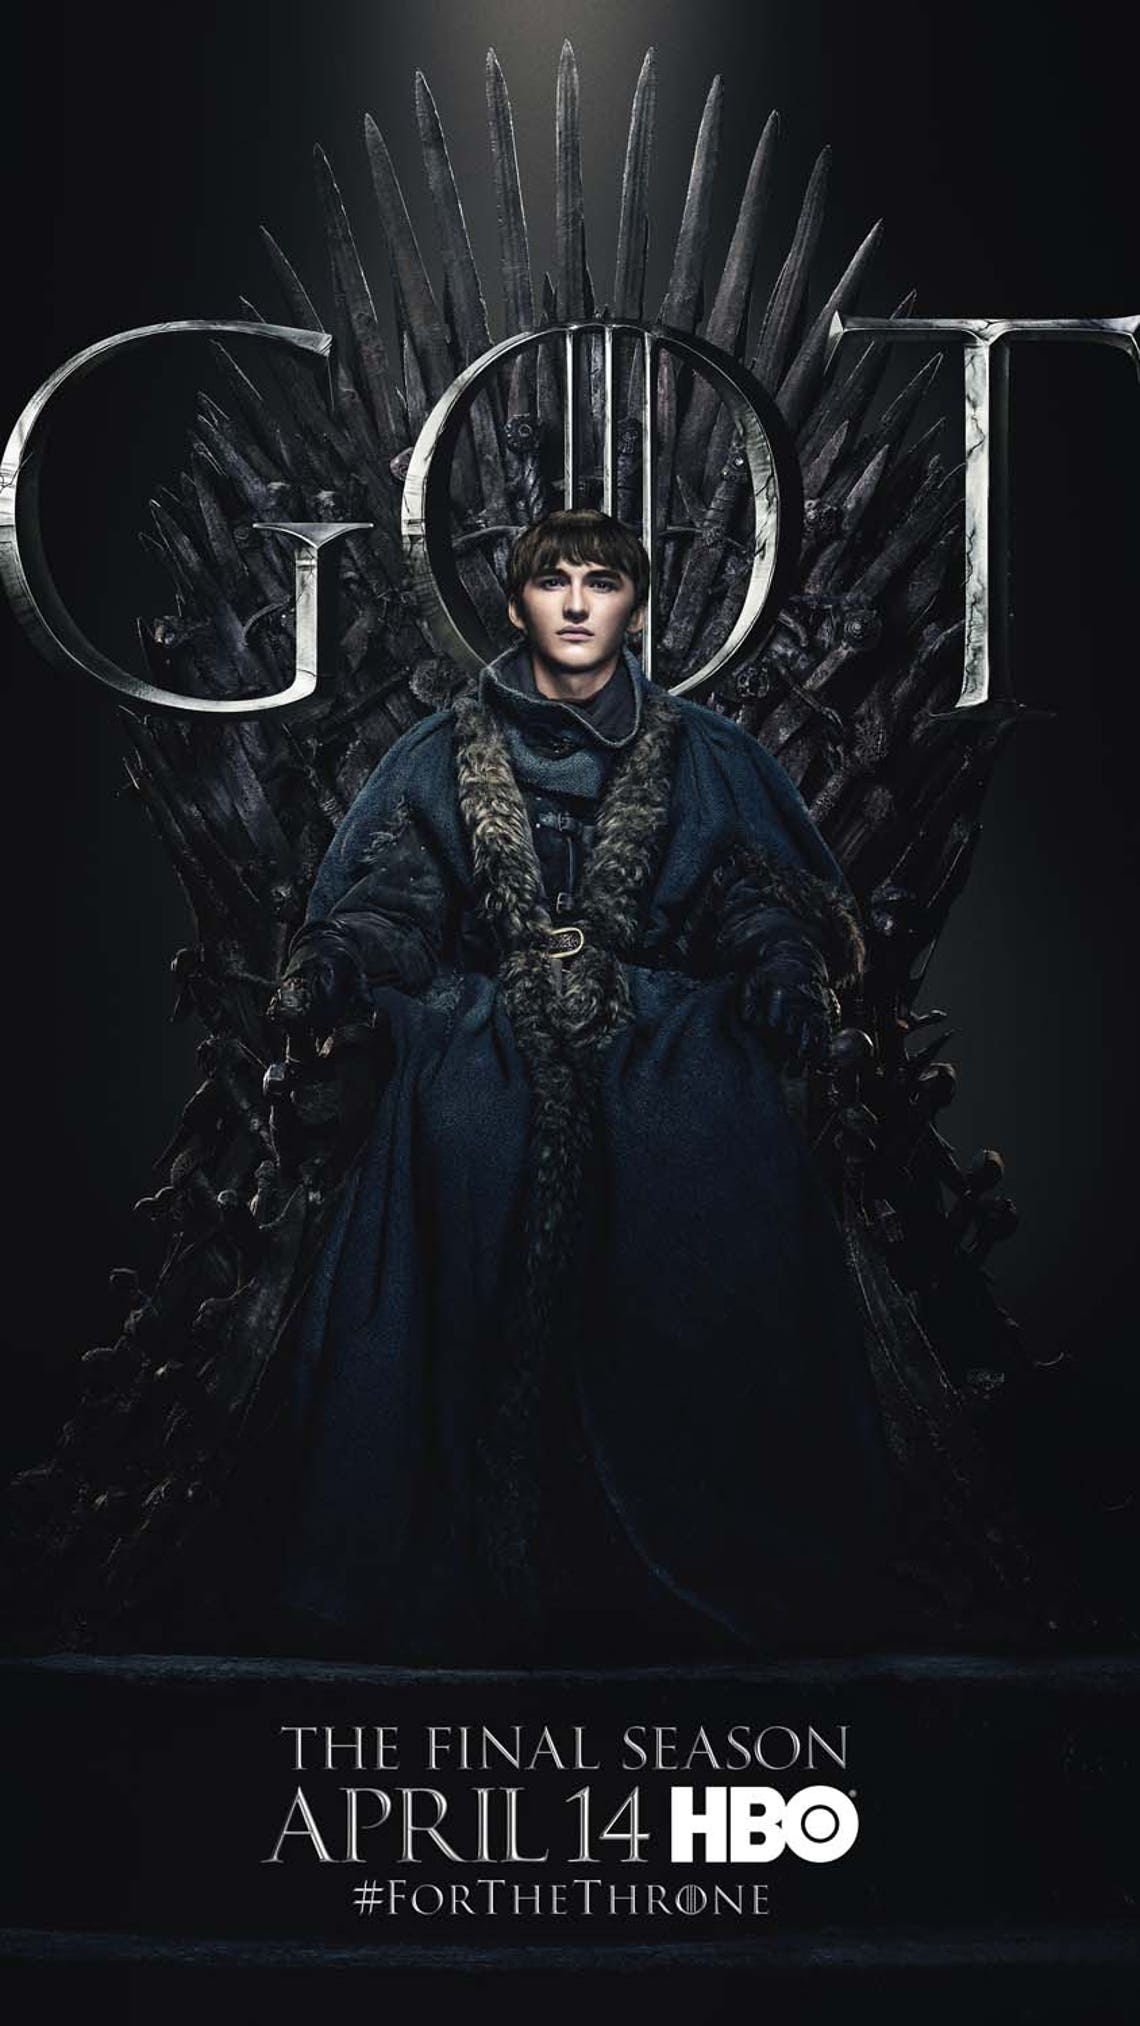 Bran Stark In The Iron Throne Wallpapers